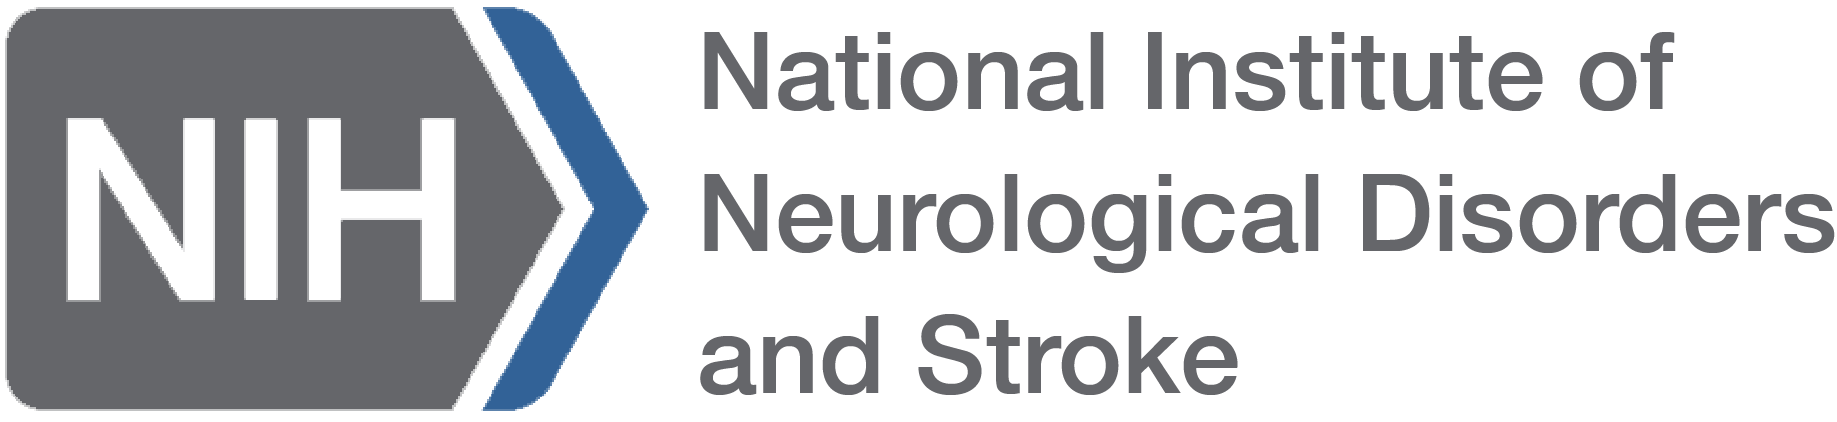 National Institute of Neurological Disorders and Stroke - Home